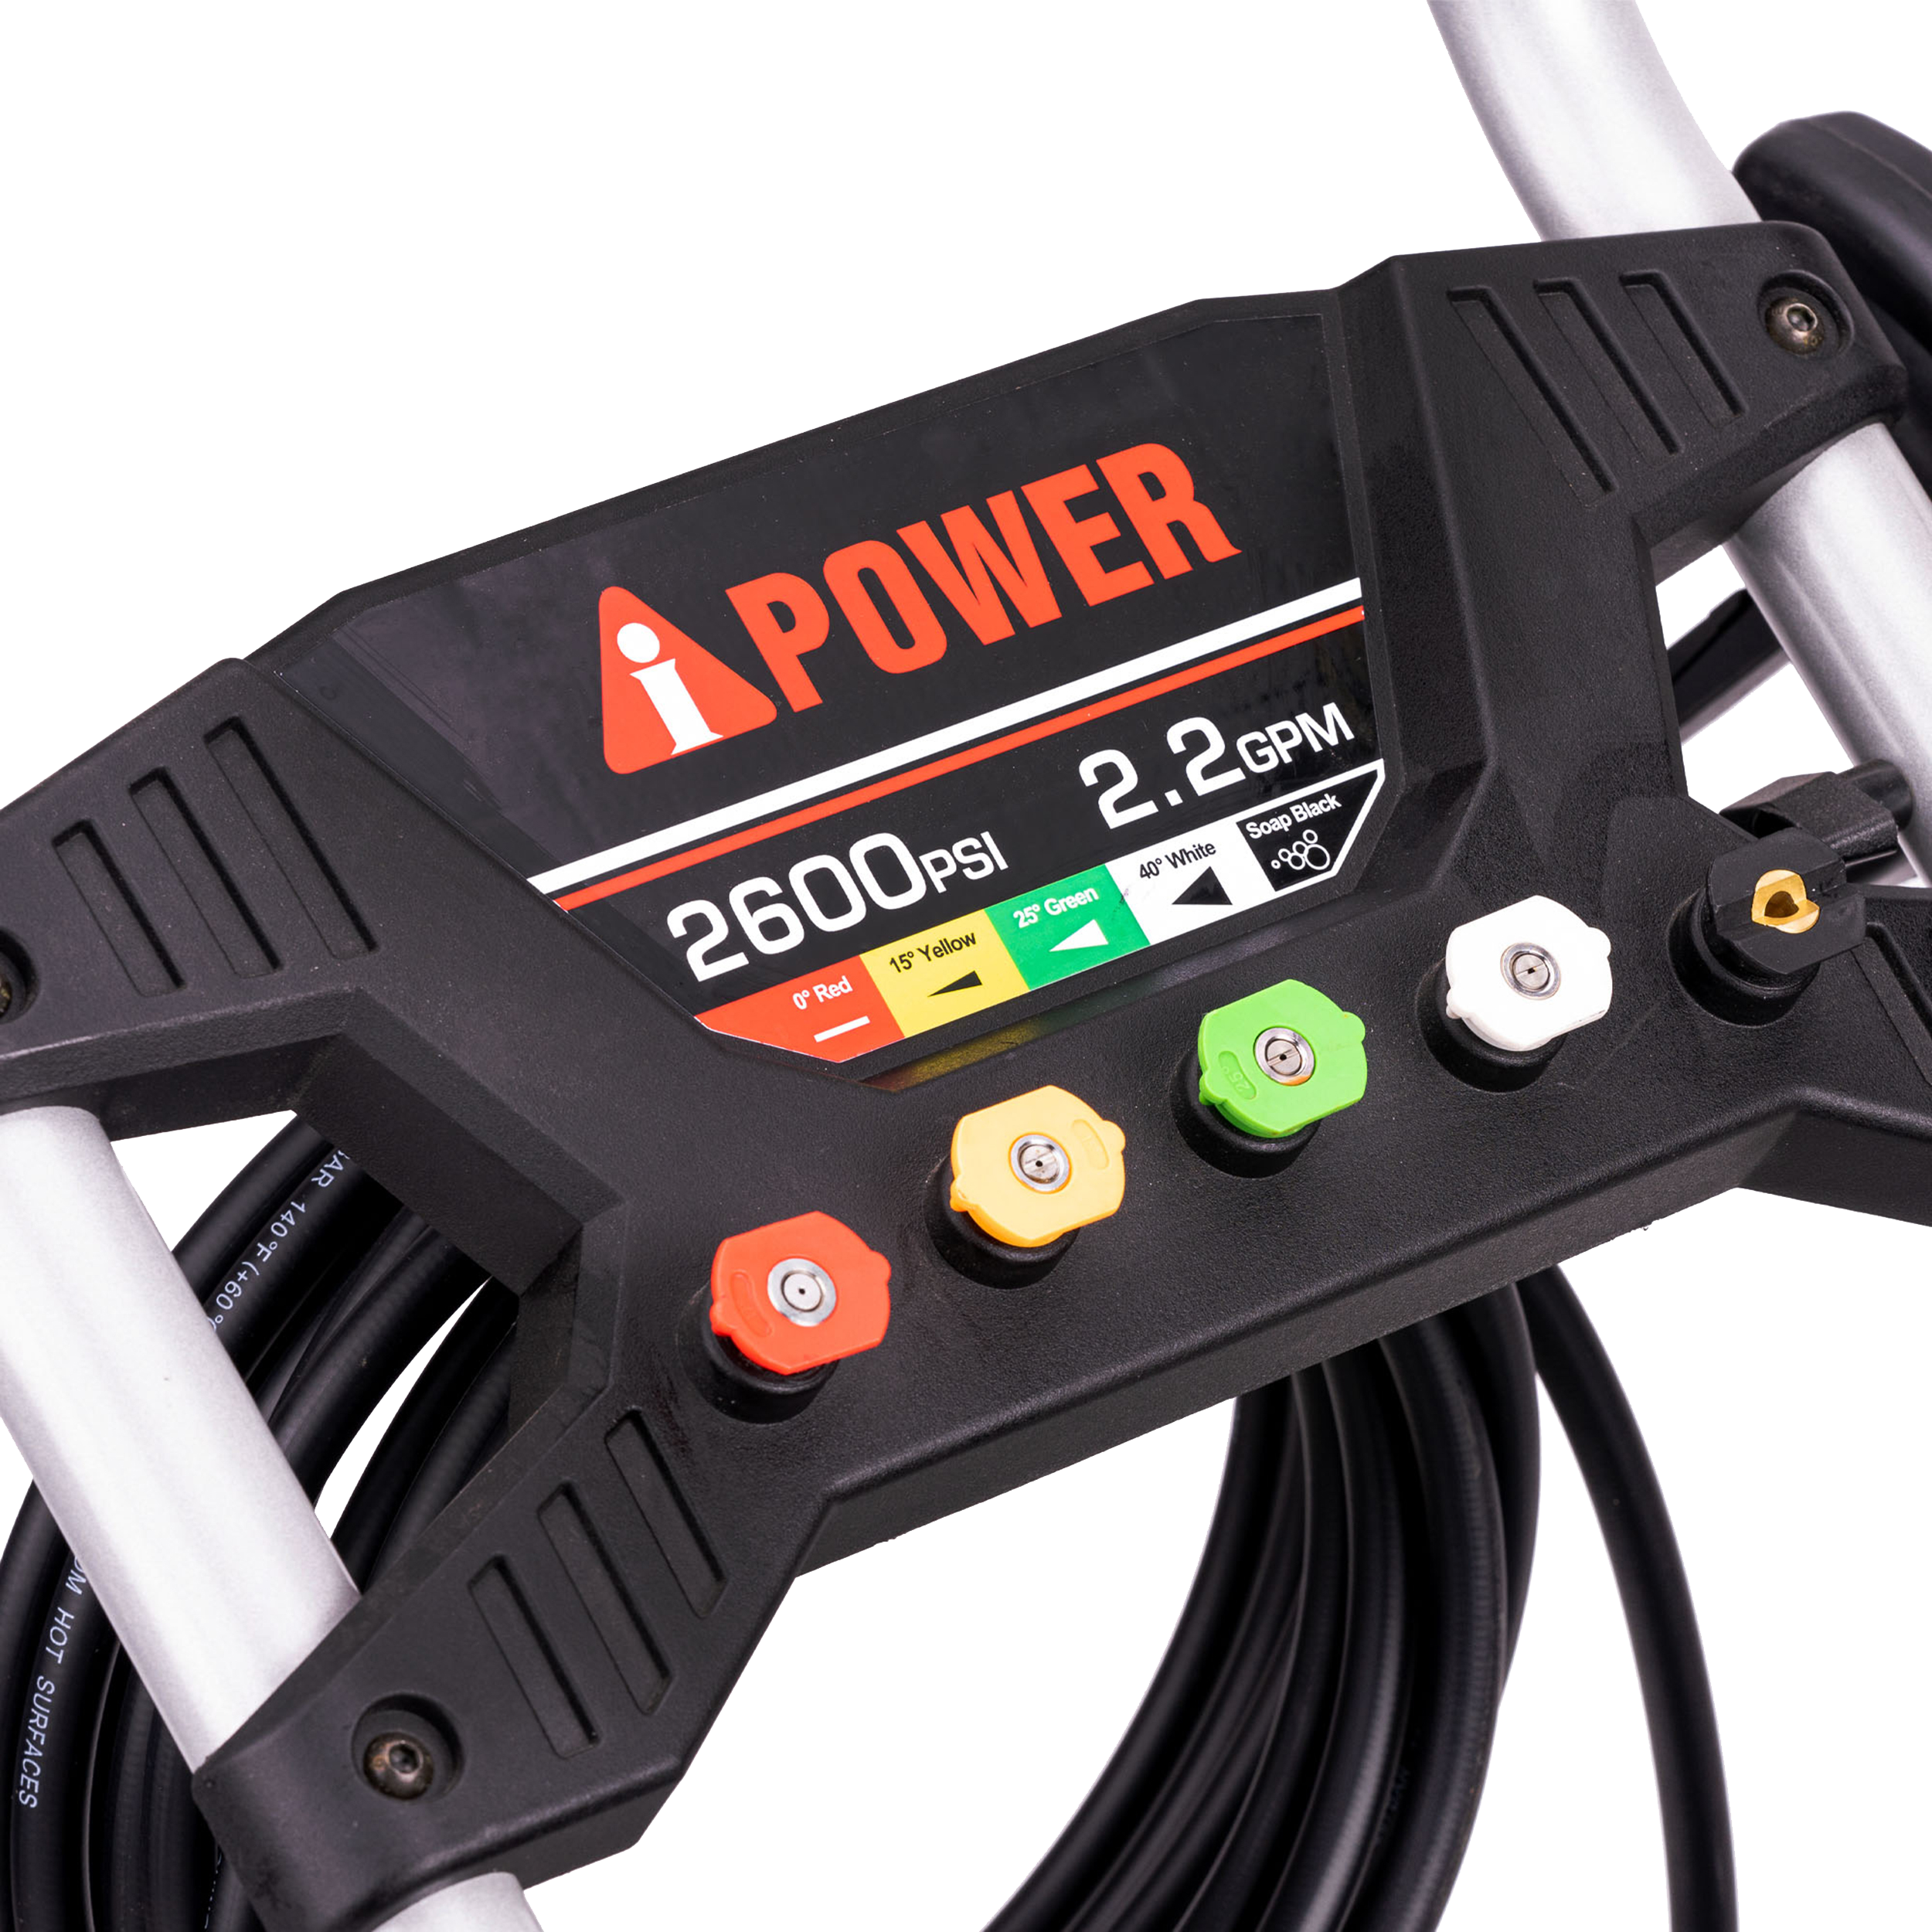 PWF2600SV - A-iPower Pressure Washer - Panel.png__PID:d8022c78-58f3-437d-a17d-3443137a7611